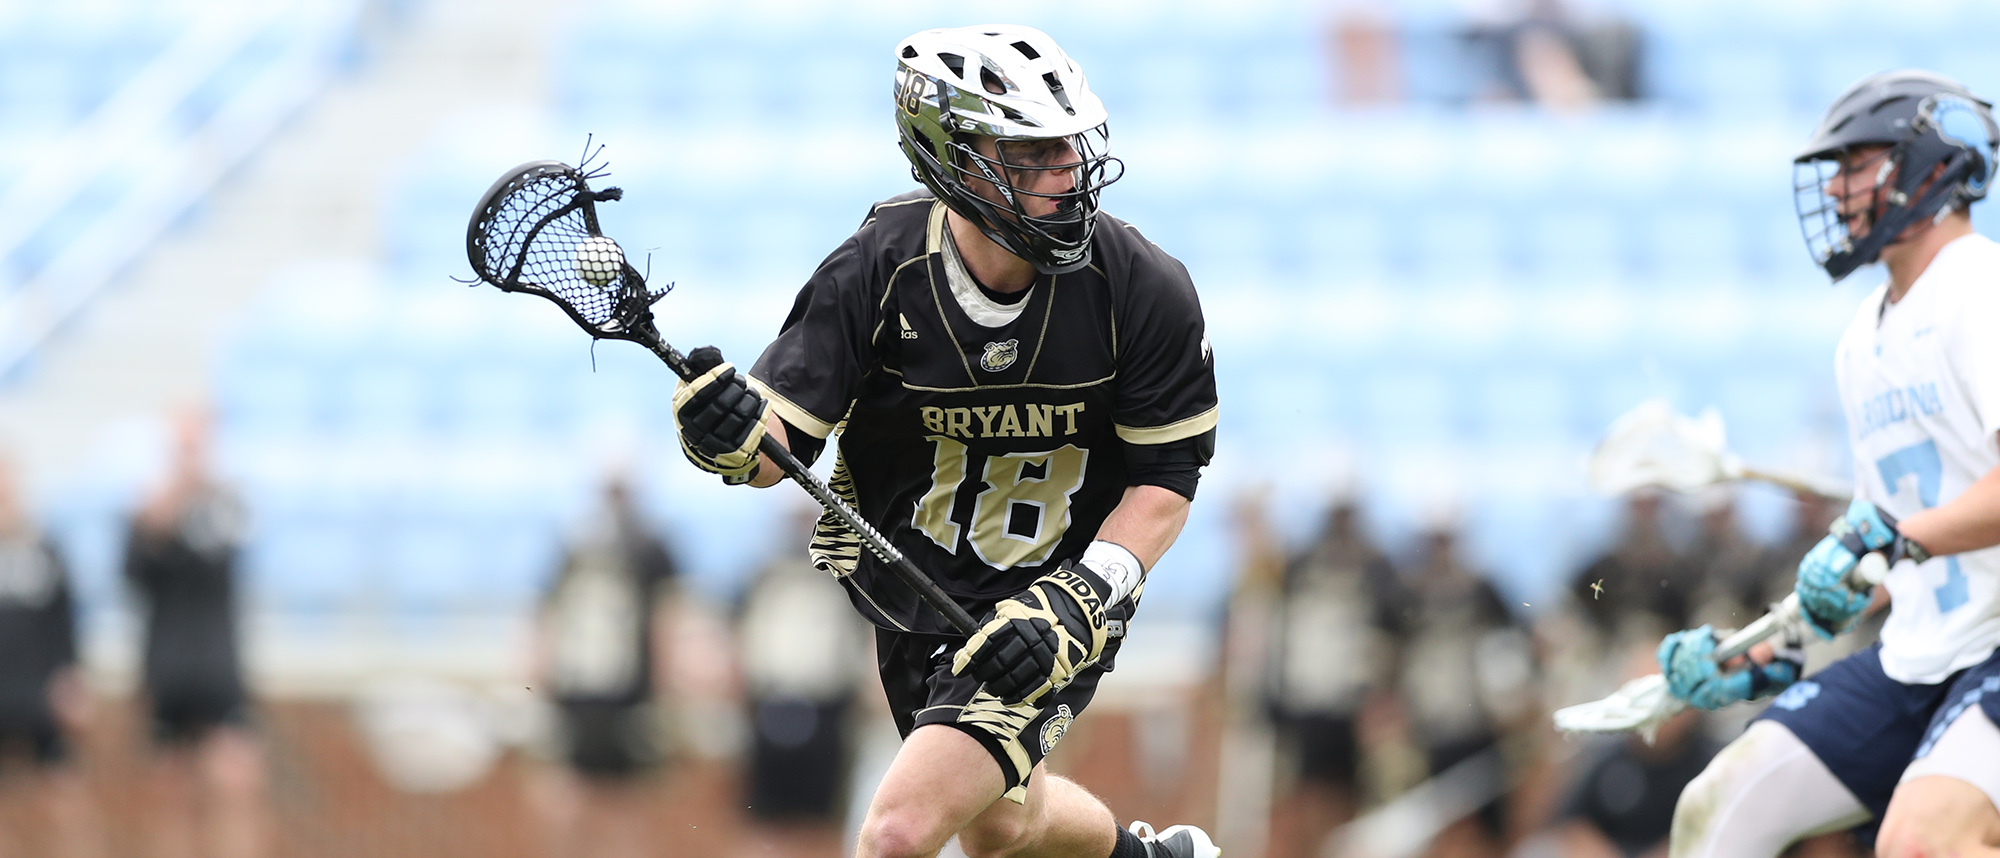 Andy Mead/Bryant Athletics